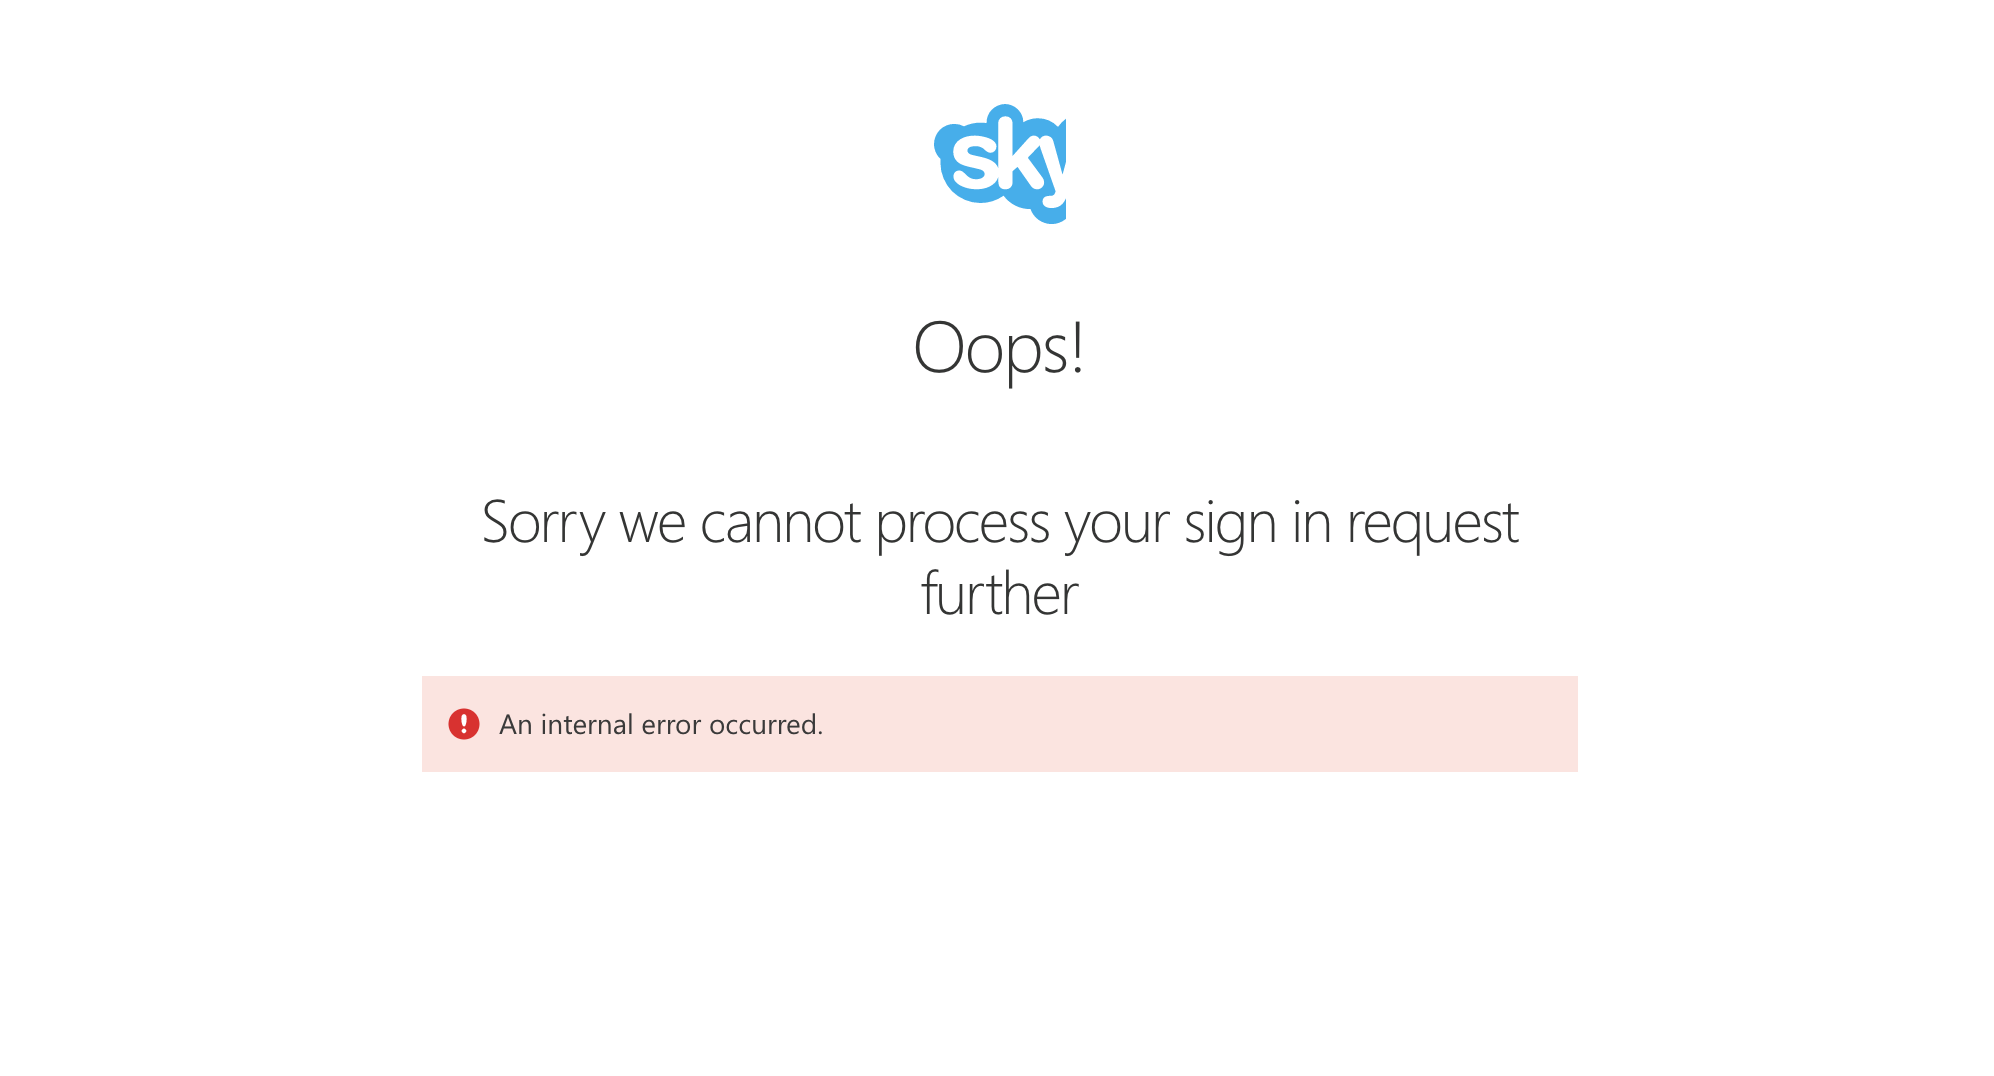 Cannot process the request. Sorry we were unable to log you in.